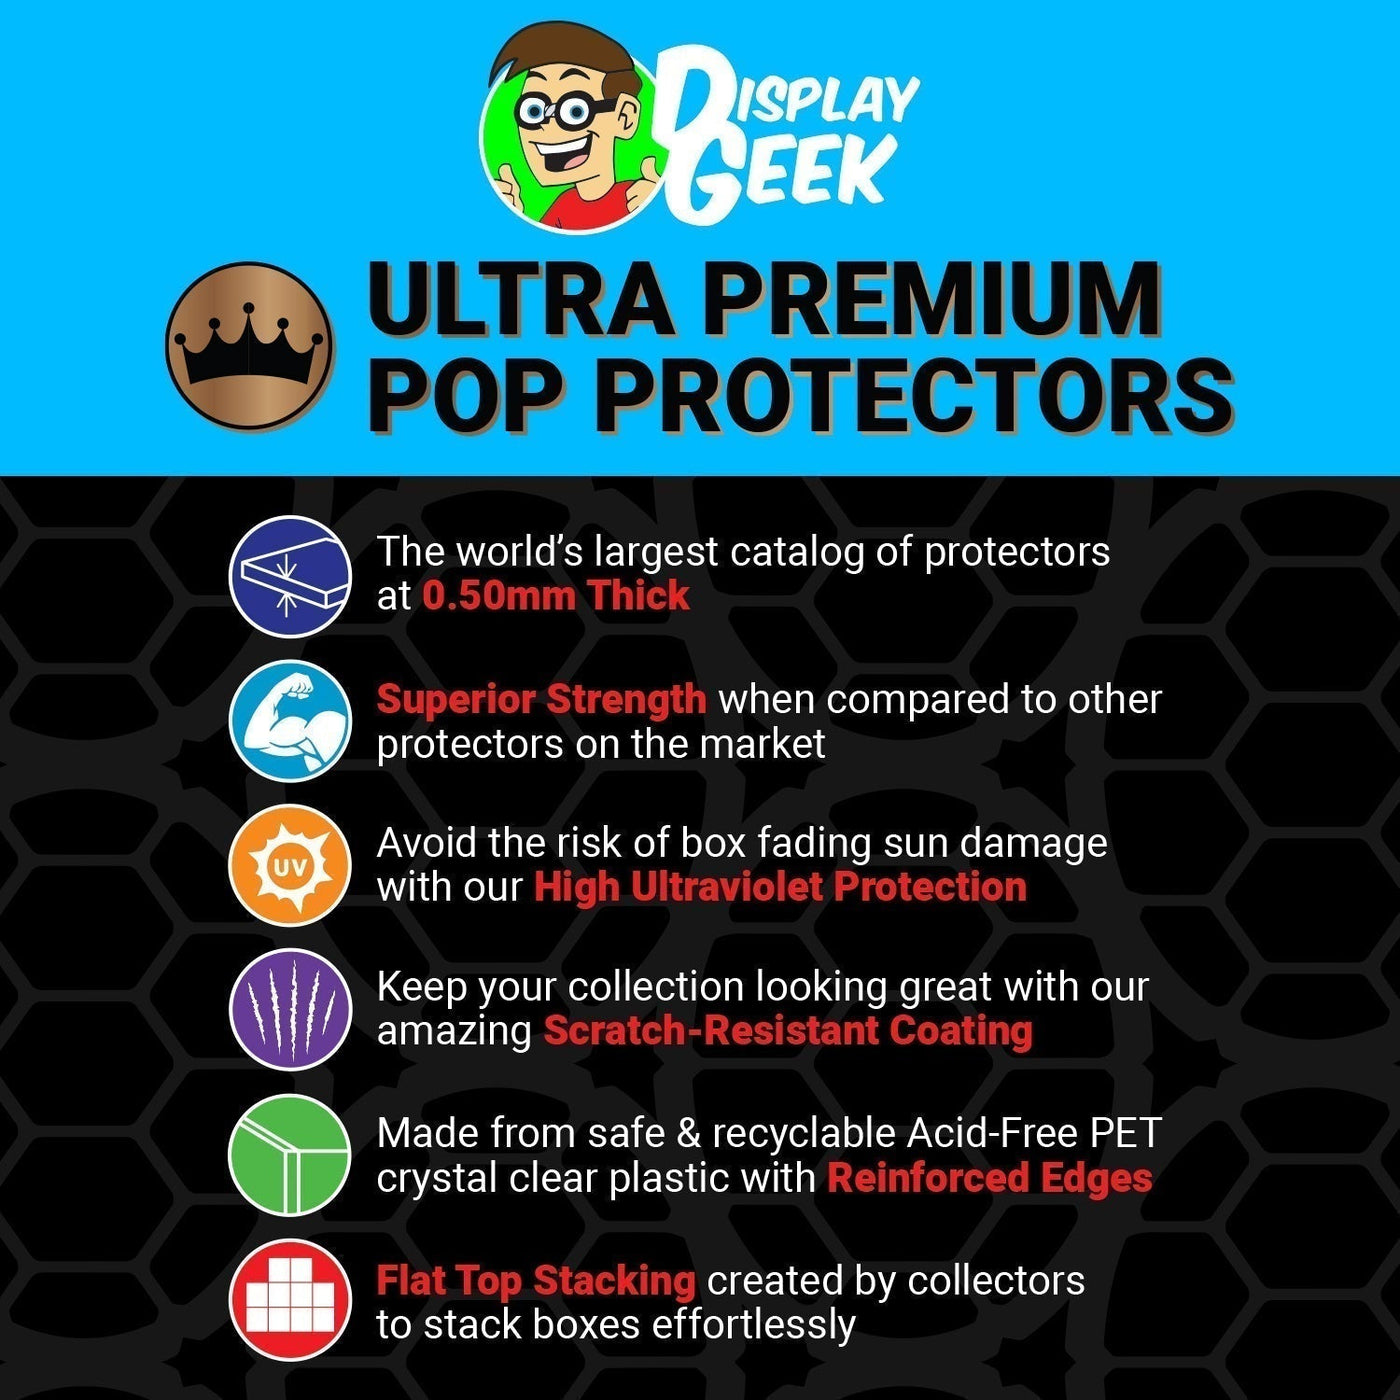 Pop Protector for 10 inch Spider-Man #1236 Jumbo Funko Pop on The Protector Guide App by Display Geek